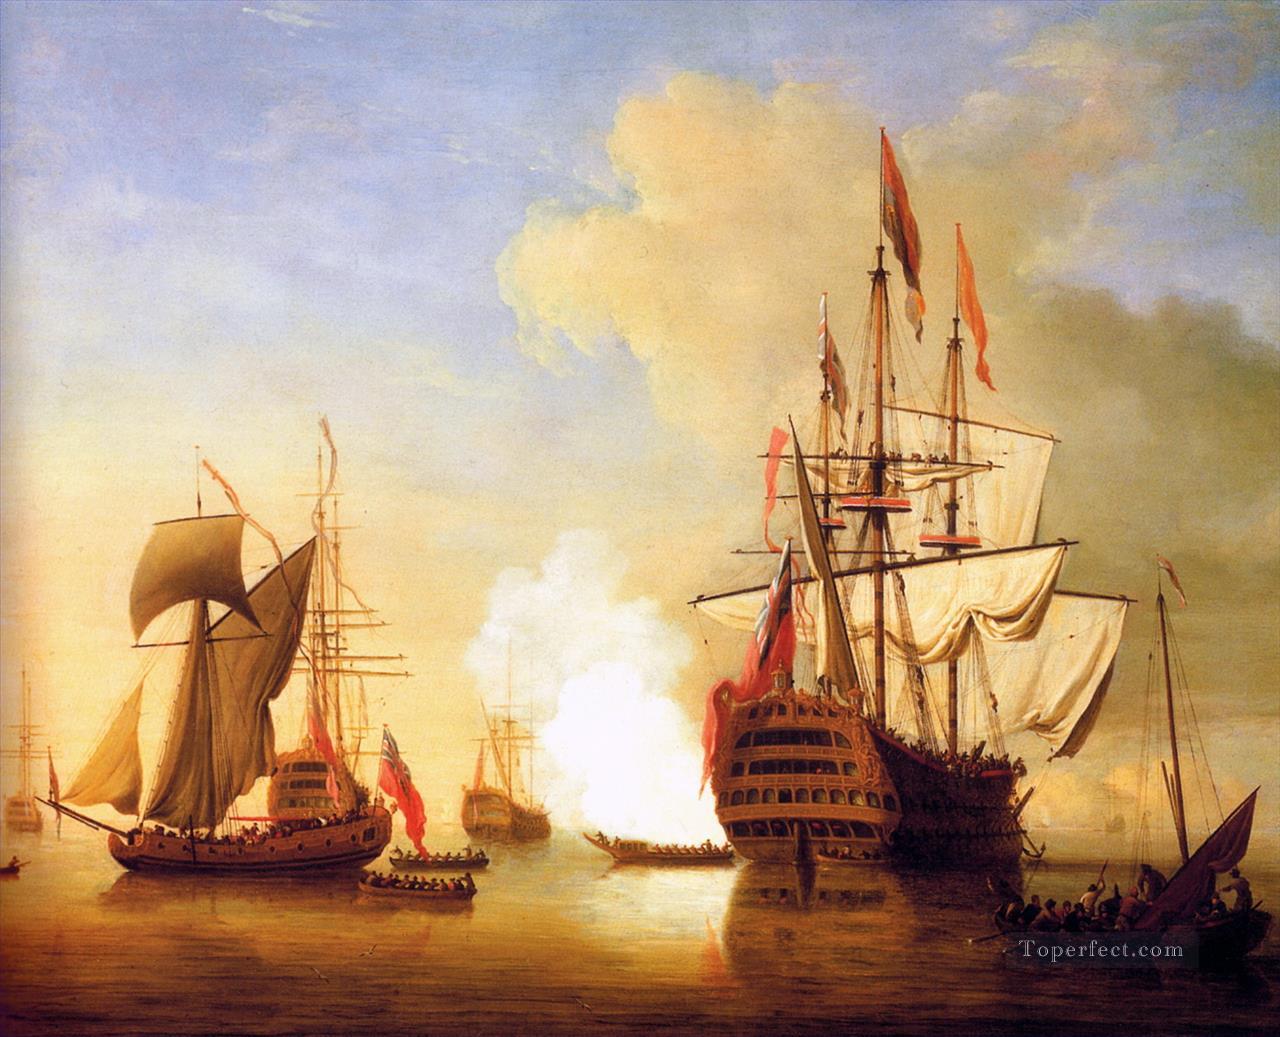 Stern View of the Royal Wil war ships Oil Paintings